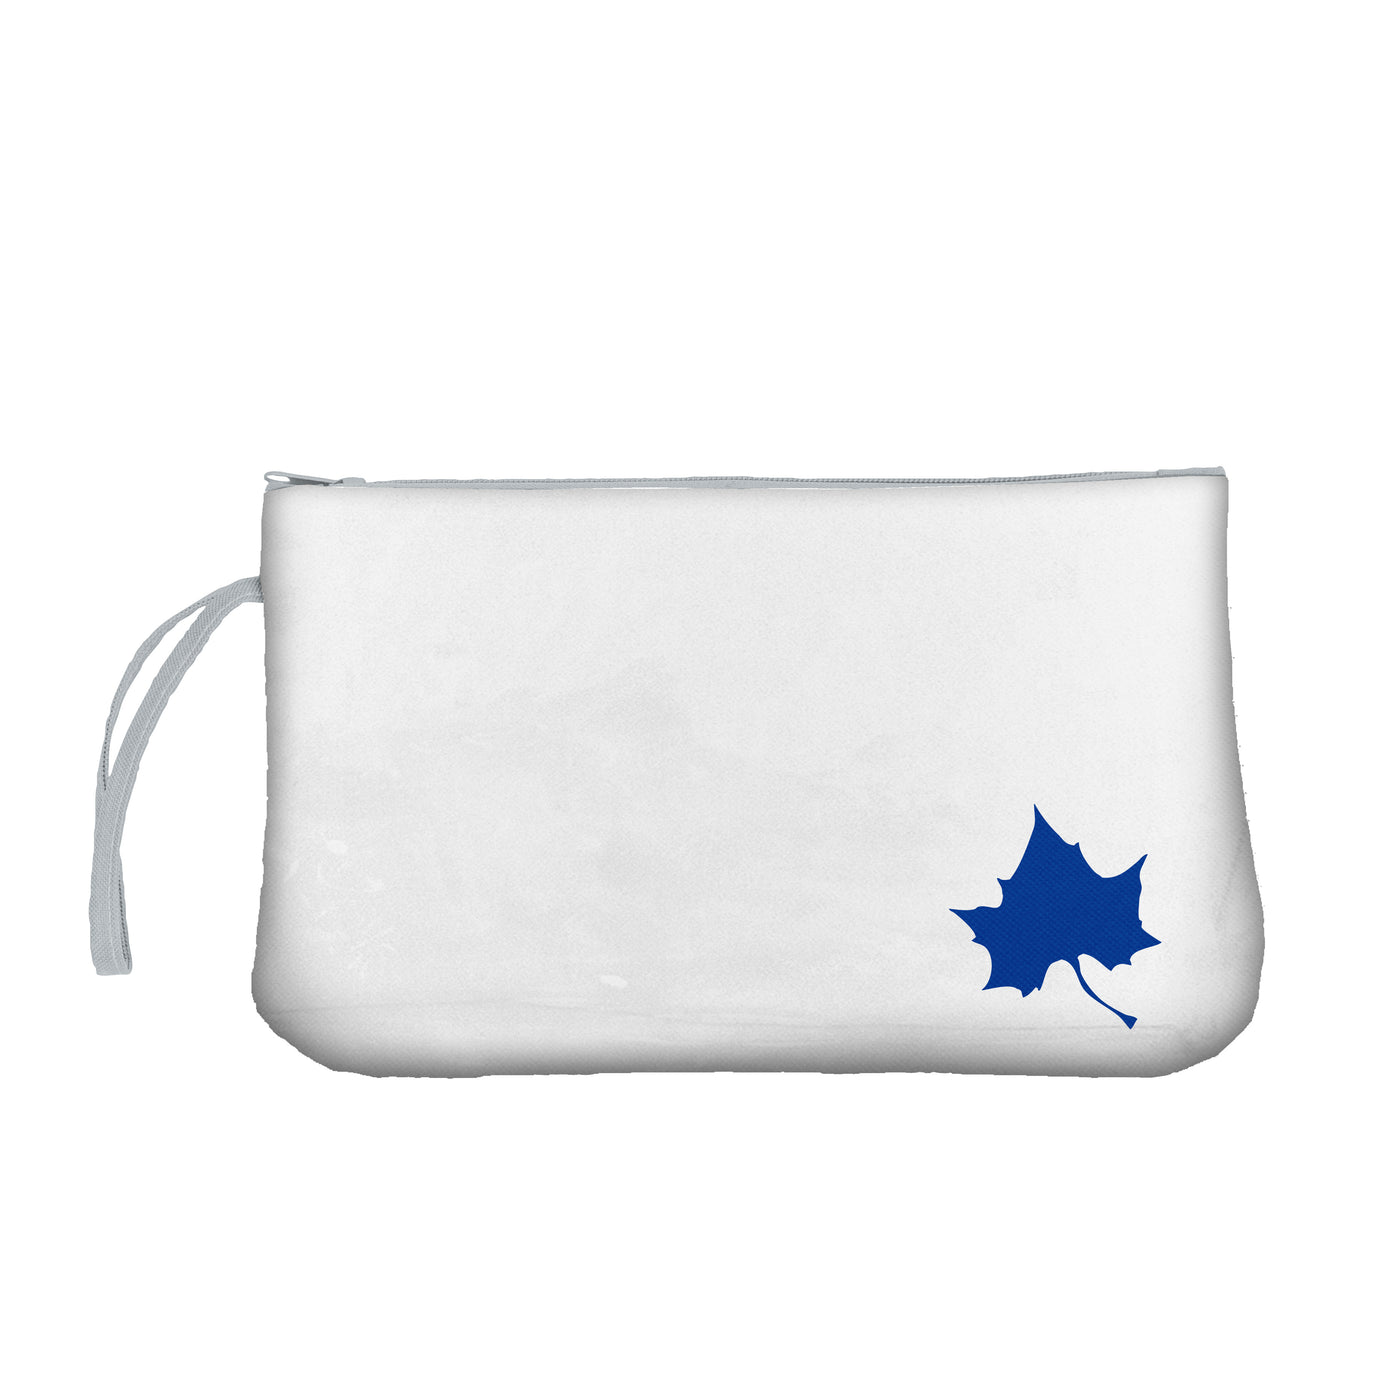 Indiana State Clear Wristlet